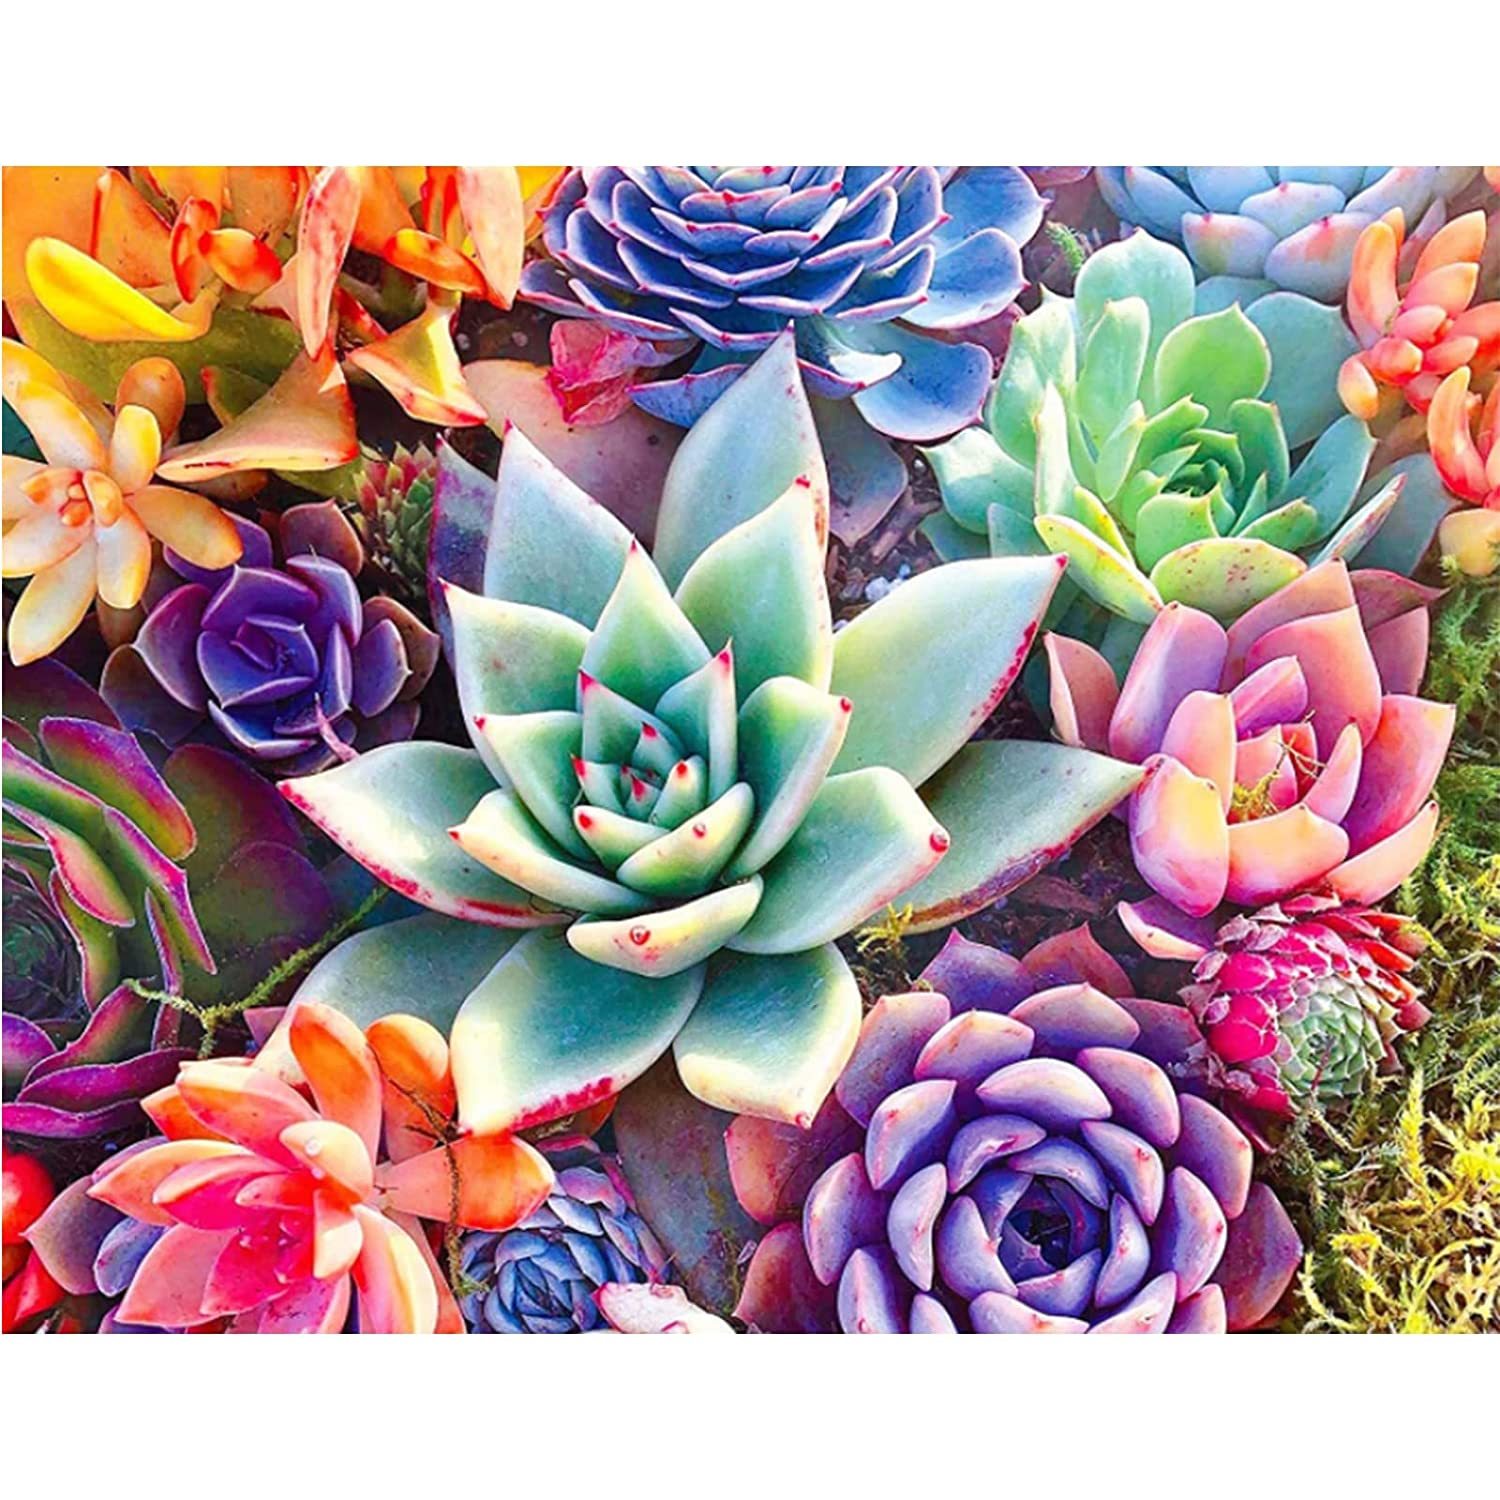 Diamond Painting Kits For Adults And Kids, Succulents Diamonds Art Paint With Di